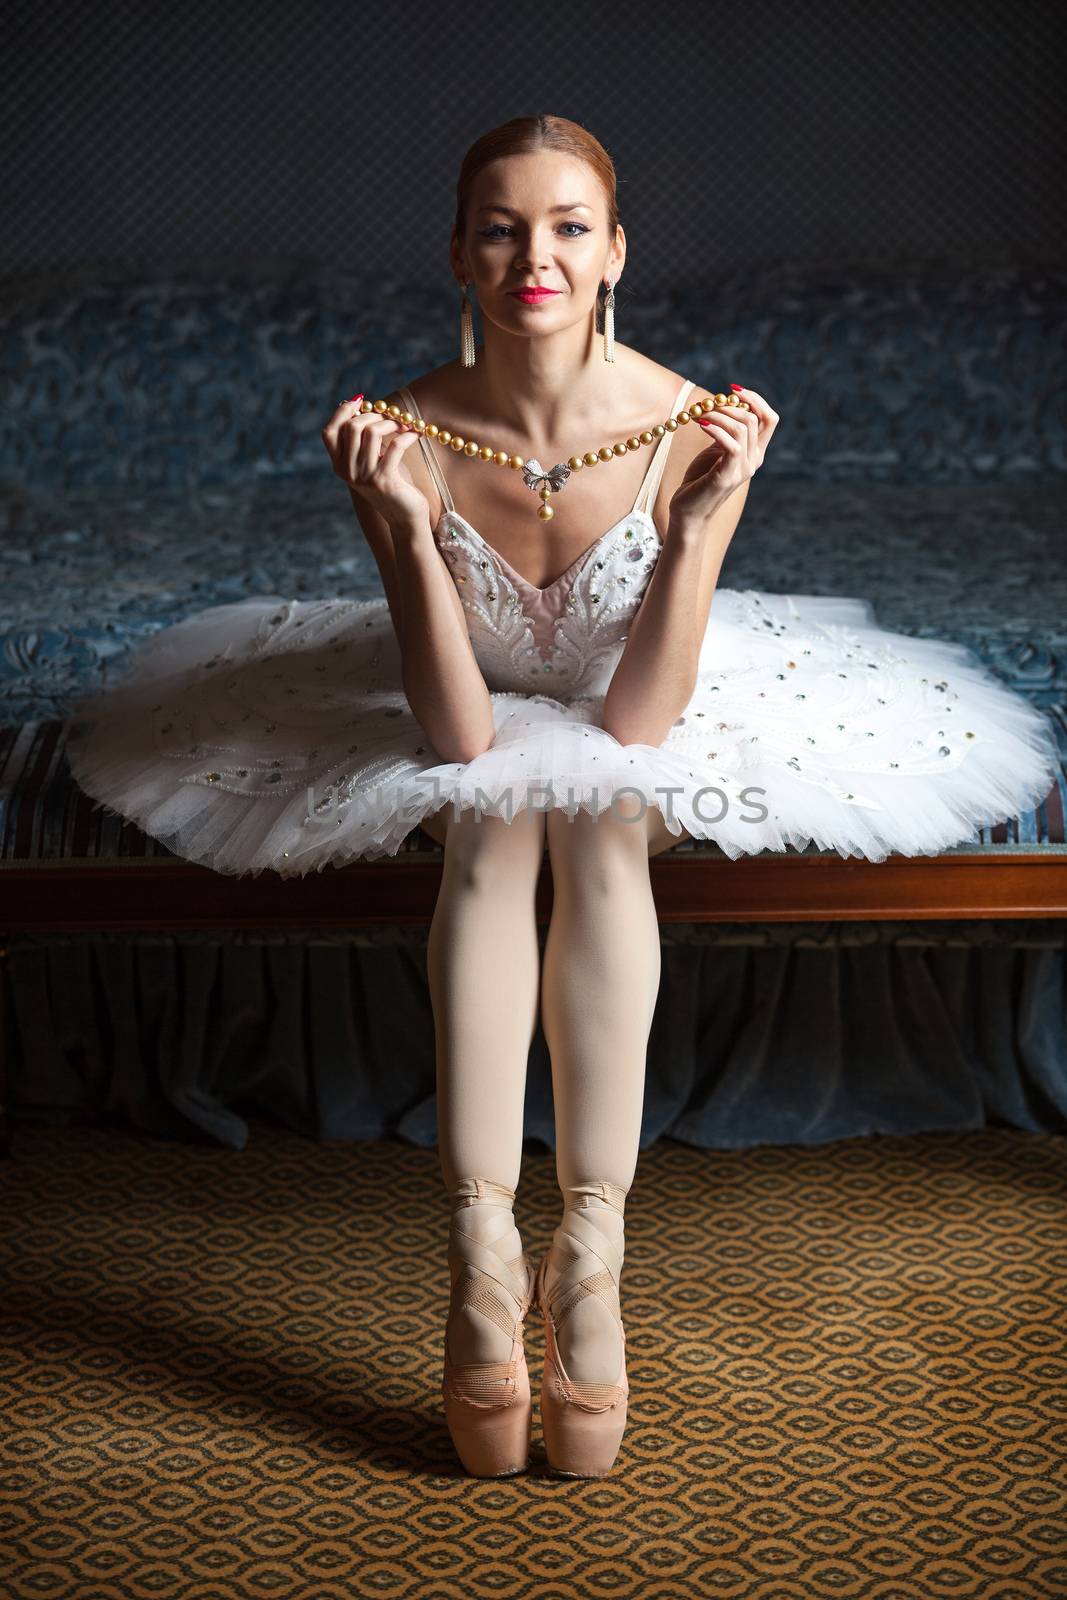 Ballerina holding pearl necklace and smiling by photobac